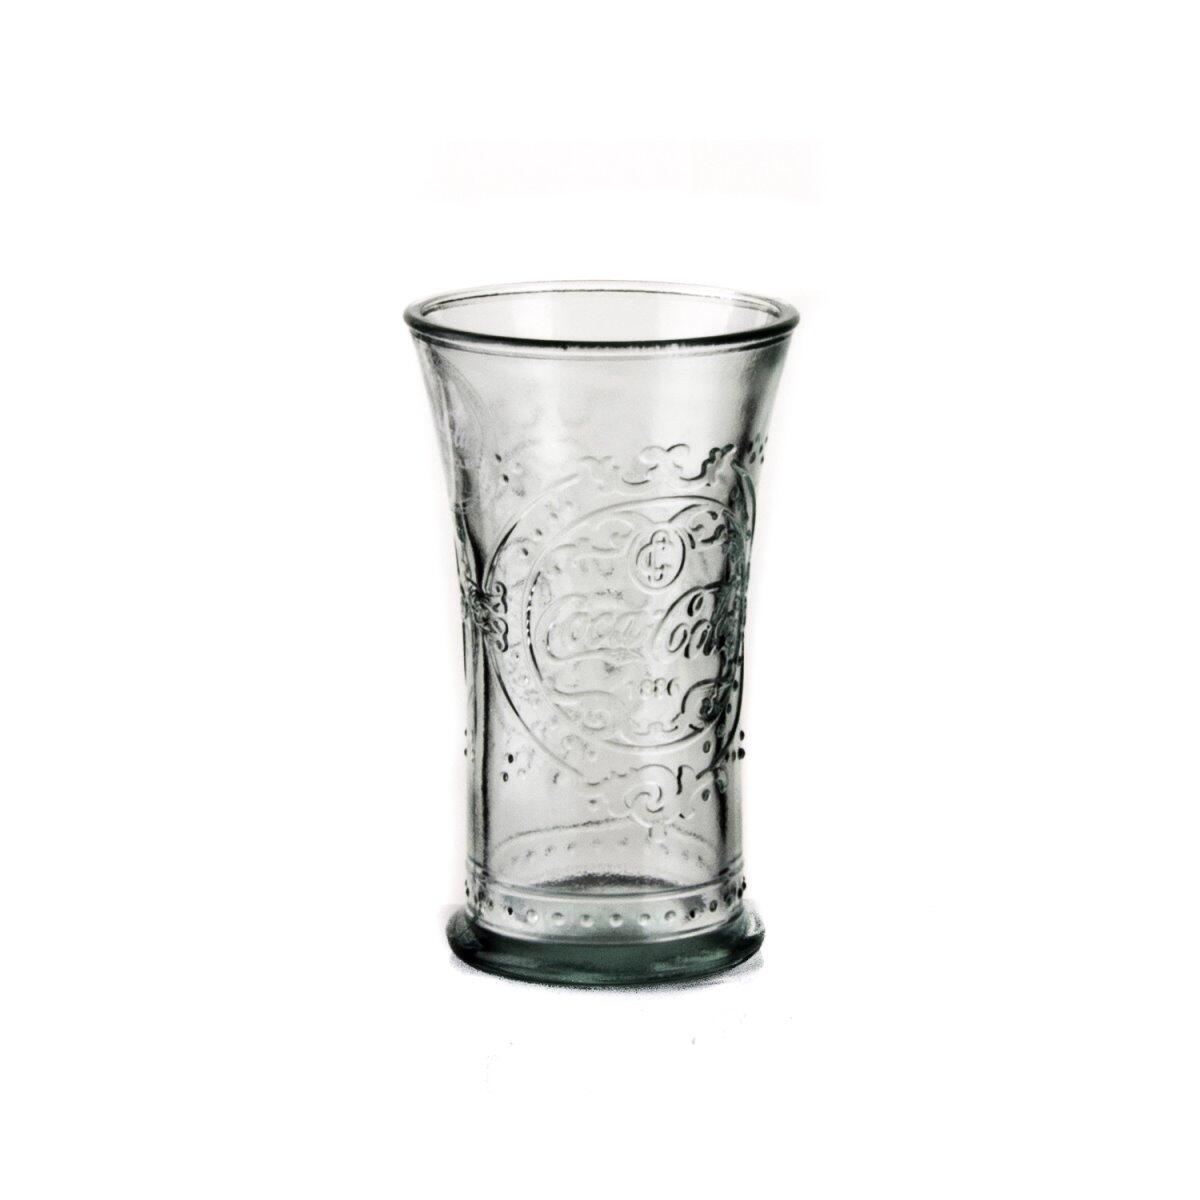 Sanmiguel Glass Cup 300 ml